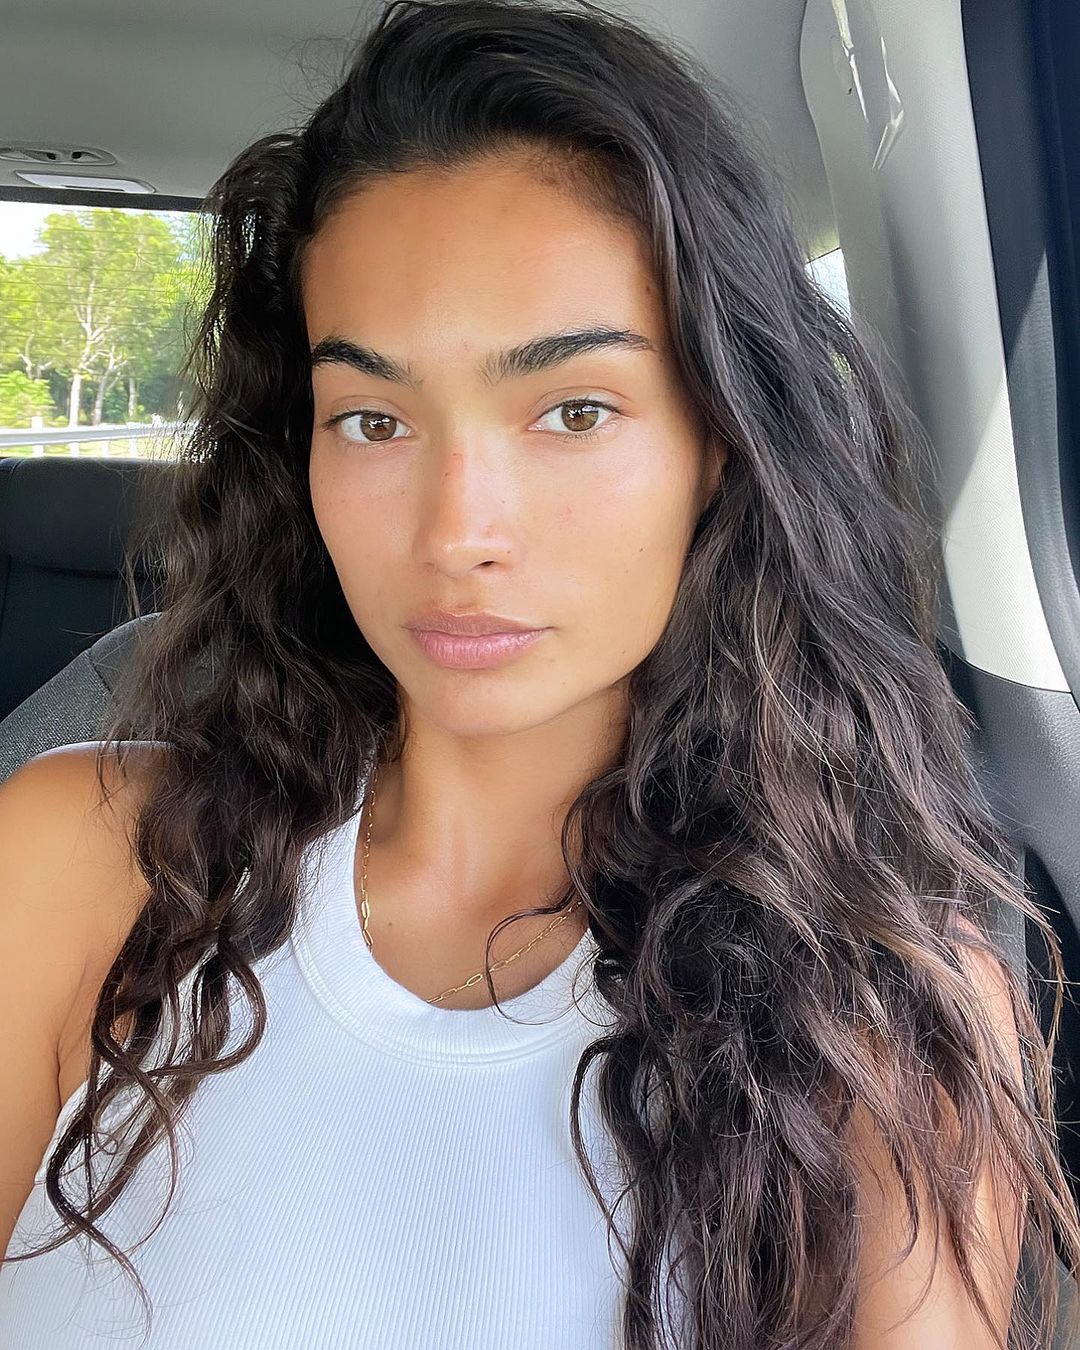 Kelly gale 24 hottest pics, kelly gale 24 instagram